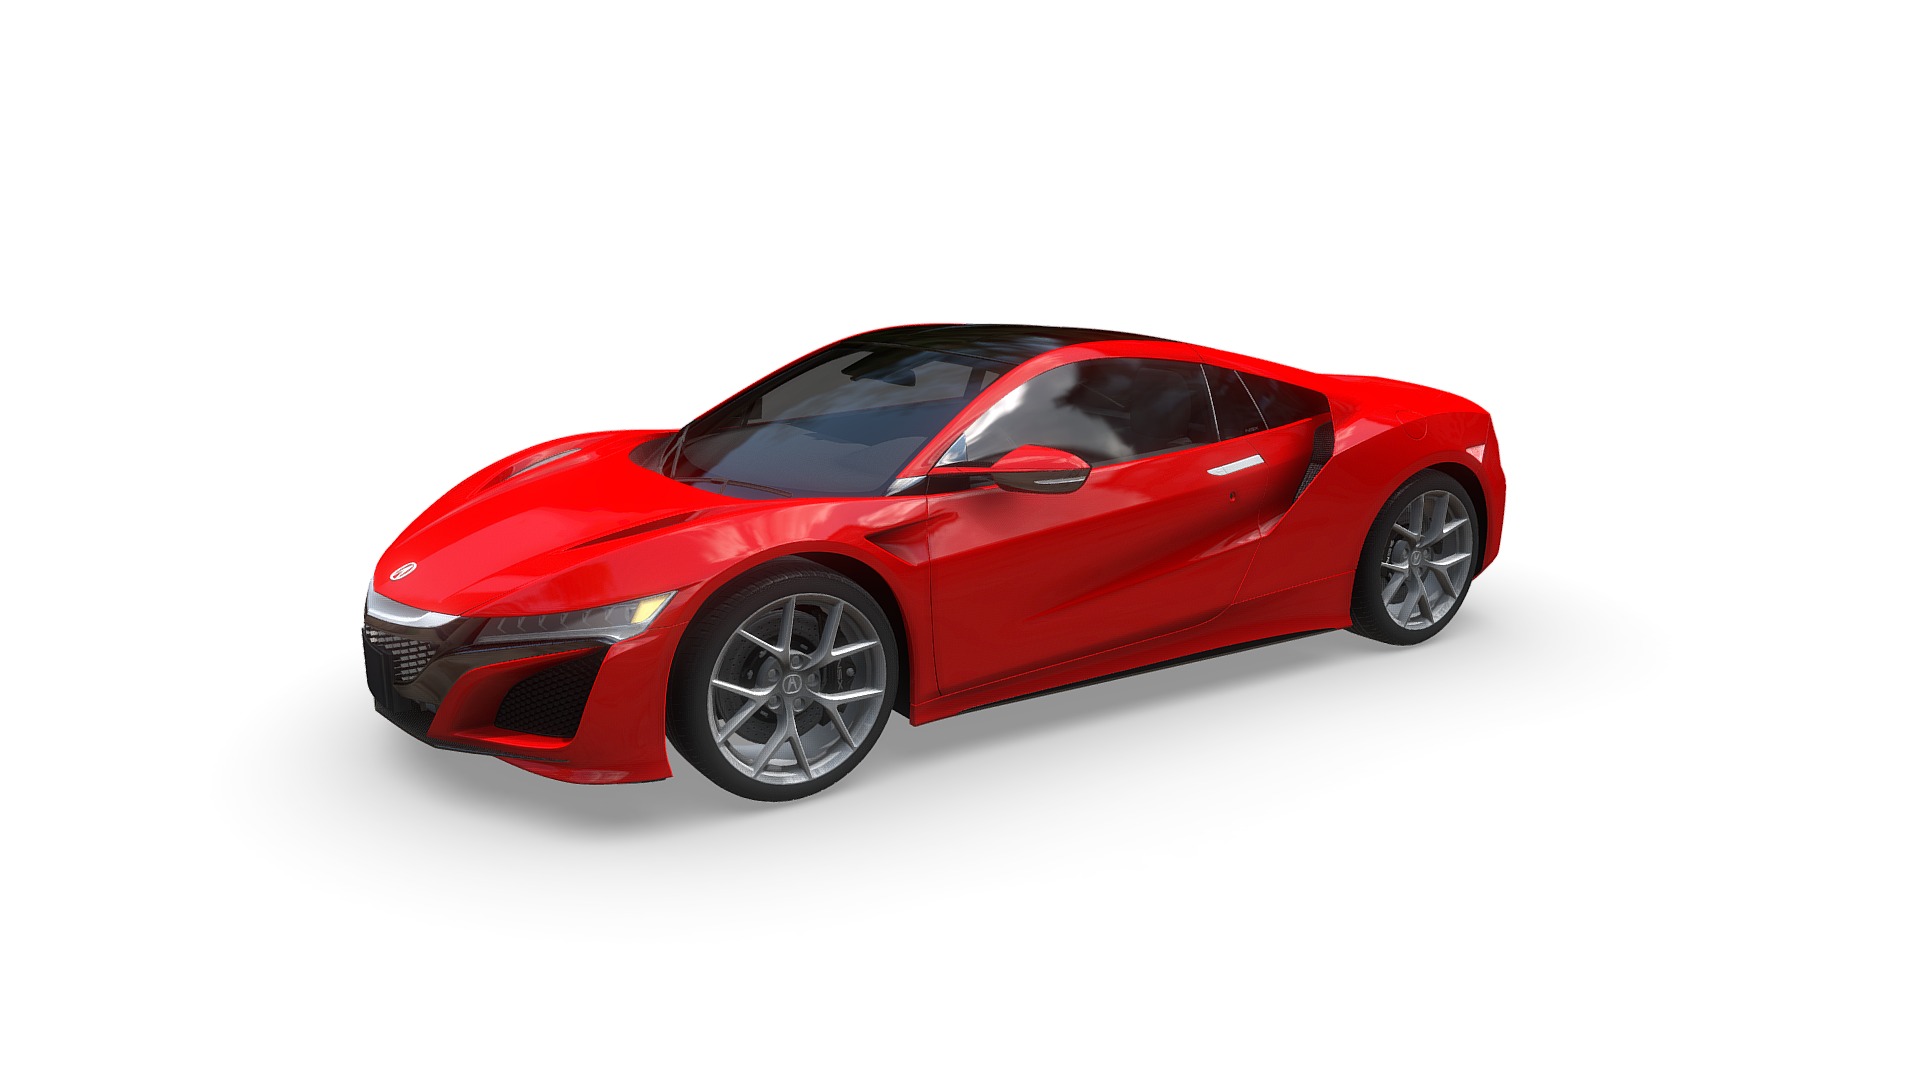 3D model Acura NSX 2016-2019 – duplicated version - This is a 3D model of the Acura NSX 2016-2019 - duplicated version. The 3D model is about a red sports car.